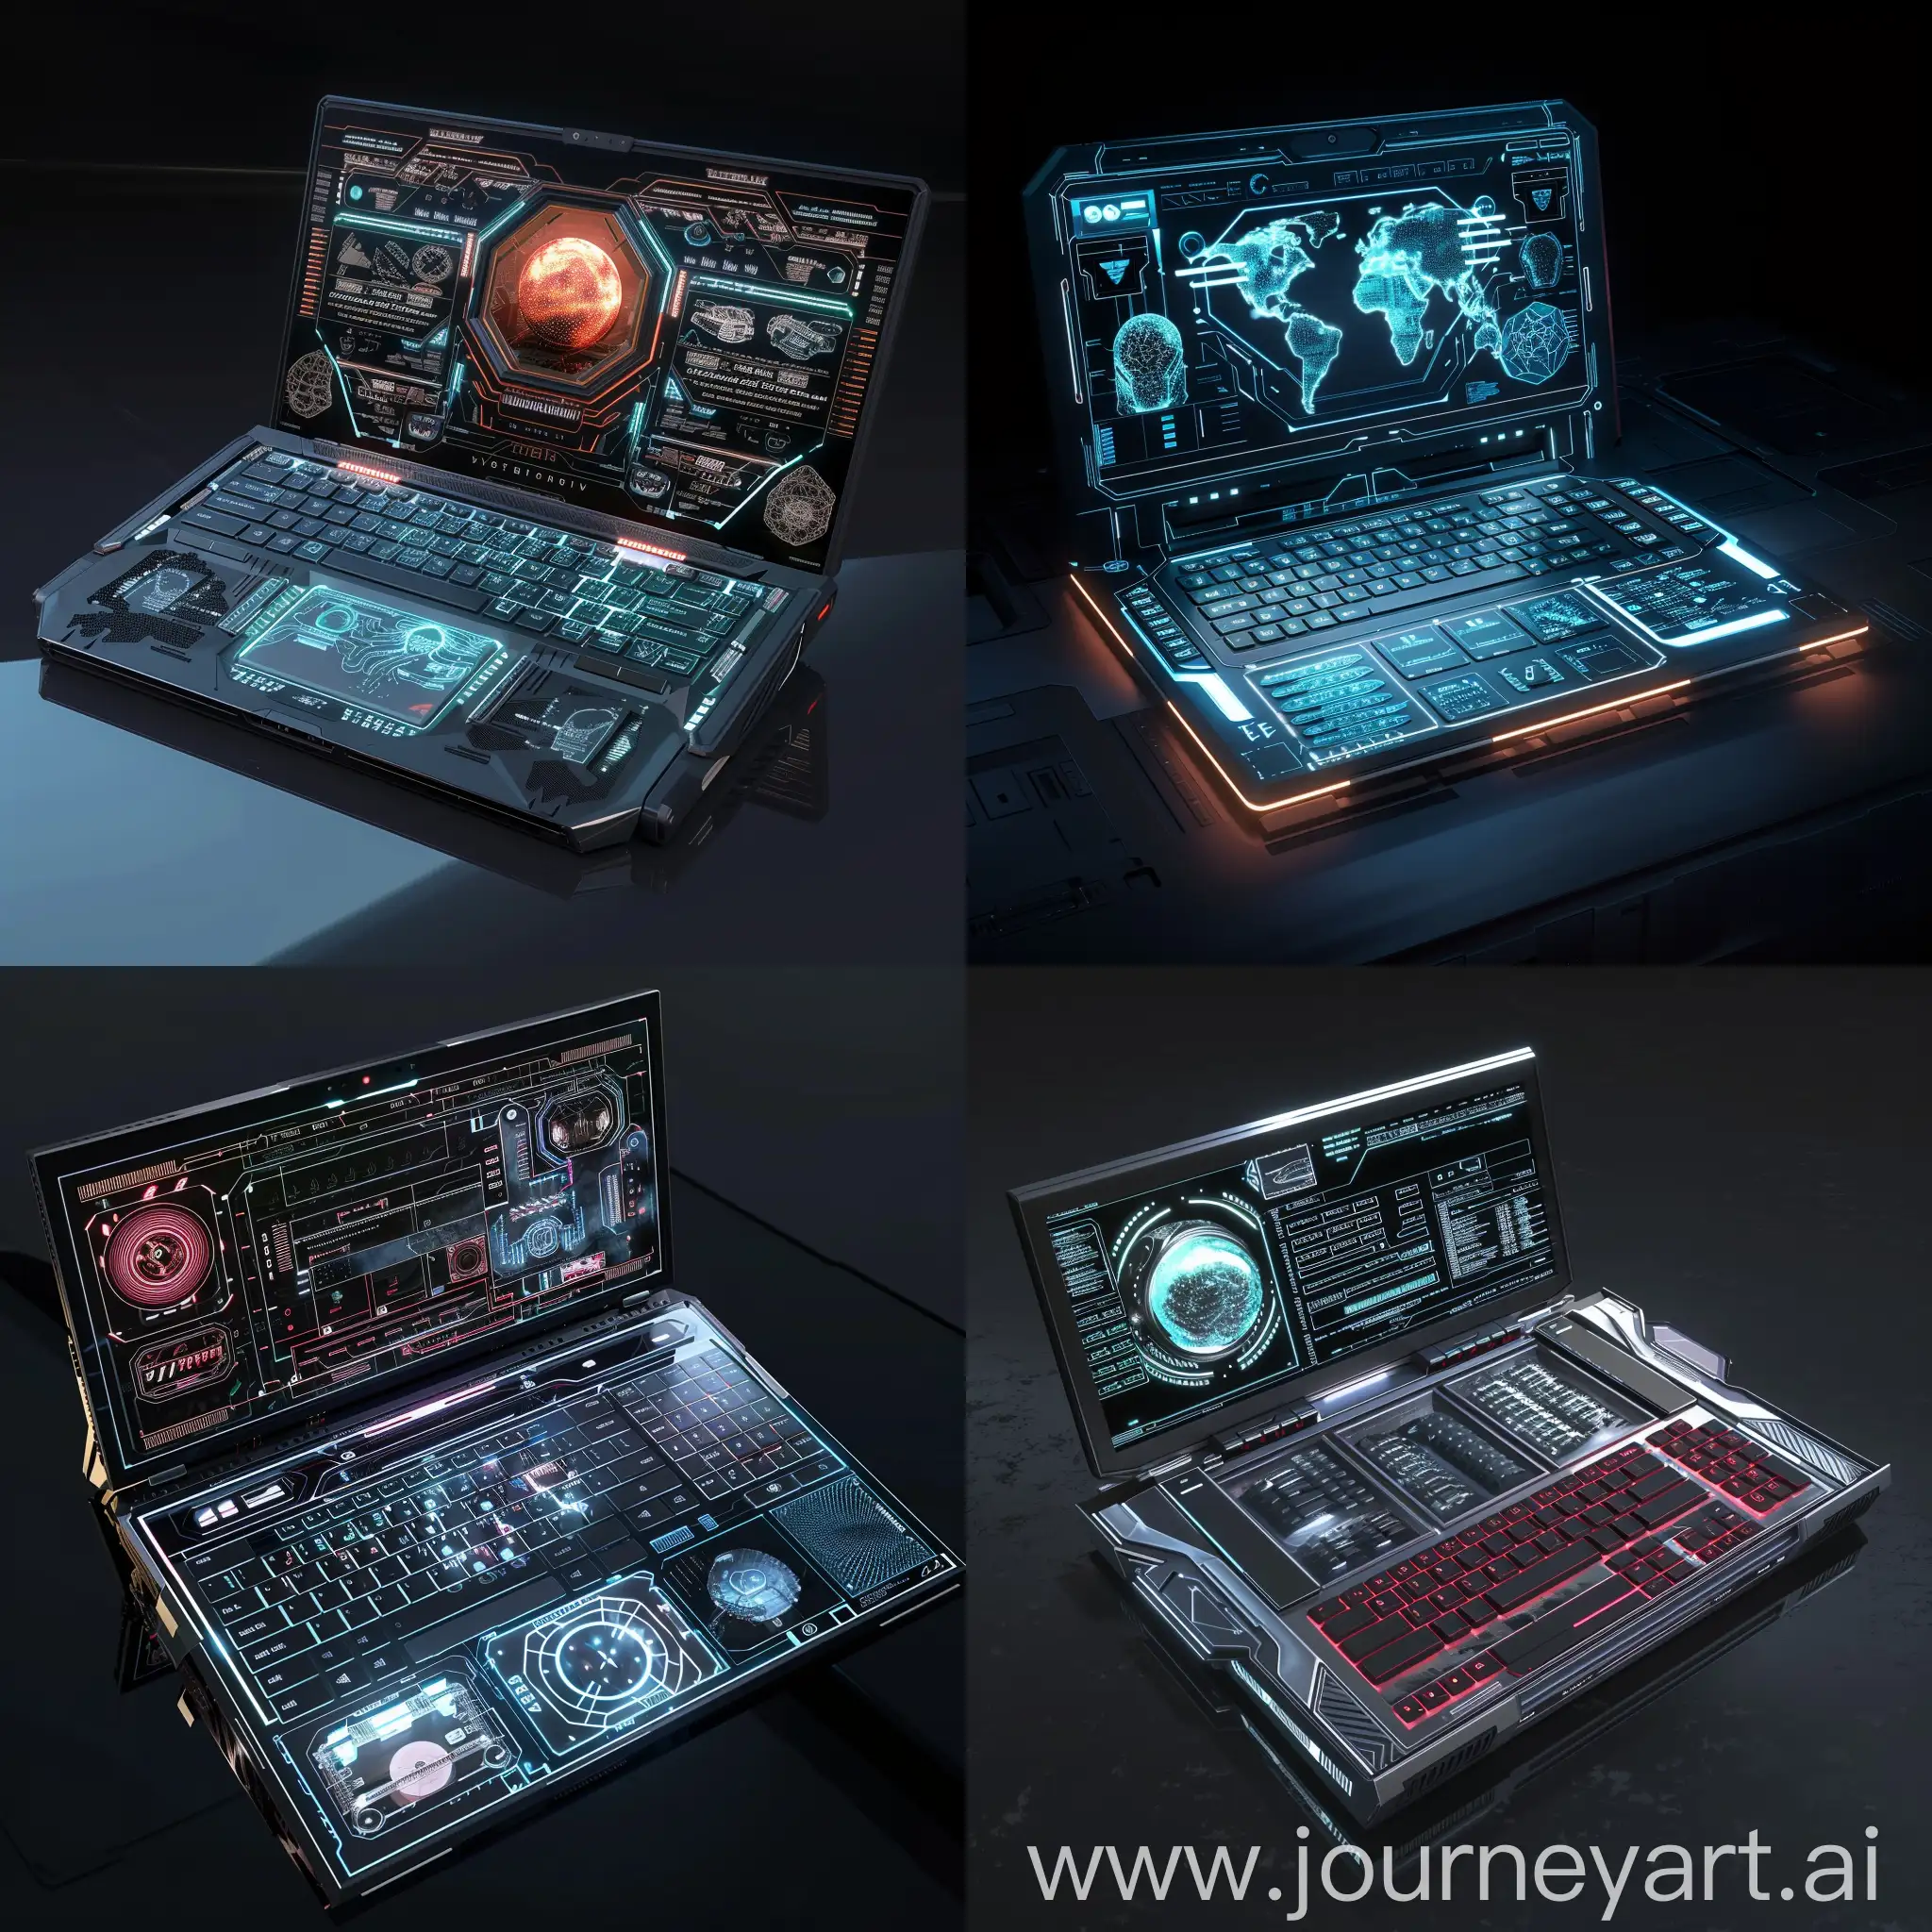 Futuristic laptop, Biometric Authentication & Self-Repair (inspired by Cyberpunk 2077 & Terminator 2: Judgement Day), Nanobot Processors & Synaptic Interfaces (inspired by Star Trek & The Matrix), Organic Batteries & Wireless Charging (inspired by Avatar & Star Wars), Modular & Holographic Displays (inspired by Transformers & Star Wars), Quantum Tunneling Transistors &  AI-powered Optimization (inspired by  Star Trek & Her), Exotic Material Heat Sinks &  Liquid Cooling Systems (inspired by Halo & Alien), Cloud-based Storage &  Distributed Processing (inspired by The Expanse & Ready Player One), Advanced Encryption &  Self-Destruct Mechanisms (inspired by Mission: Impossible & Star Trek), VR Integration &  Haptic Feedback (inspired by Ready Player One & The Matrix), Environmentally Friendly Materials & Sustainable Power Sources (inspired by Avatar & WALL*E), Morphing Chassis & Organic Materials (inspired by Terminator 2 & Avatar), Edge-to-edge Displays & Flexible Screens (inspired by Star Trek & Ex Machina), Ambient Lighting & Context-Aware Interfaces (inspired by Blade Runner & Minority Report), Augmented Reality Integration & Projected Keyboards (inspired by Ghost in the Shell & Iron Man), Wireless Connectivity & Magnetic Docking (inspired by Star Wars & The Expanse), Biometric Security & Voice Control (inspired by Deus Ex & Star Trek), Modular Components & Swappable Skins (inspired by Transformers & Mass Effect), 3D Projection & Holographic Interfaces (inspired by Star Wars & Star Trek), Self-Cleaning Surfaces & Antimicrobial Coatings (inspired by Wall-E & Star Trek), Environmentally Friendly Materials & Sustainable Design (inspired by Avatar & WALL-E), unreal engine 5 --stylize 1000